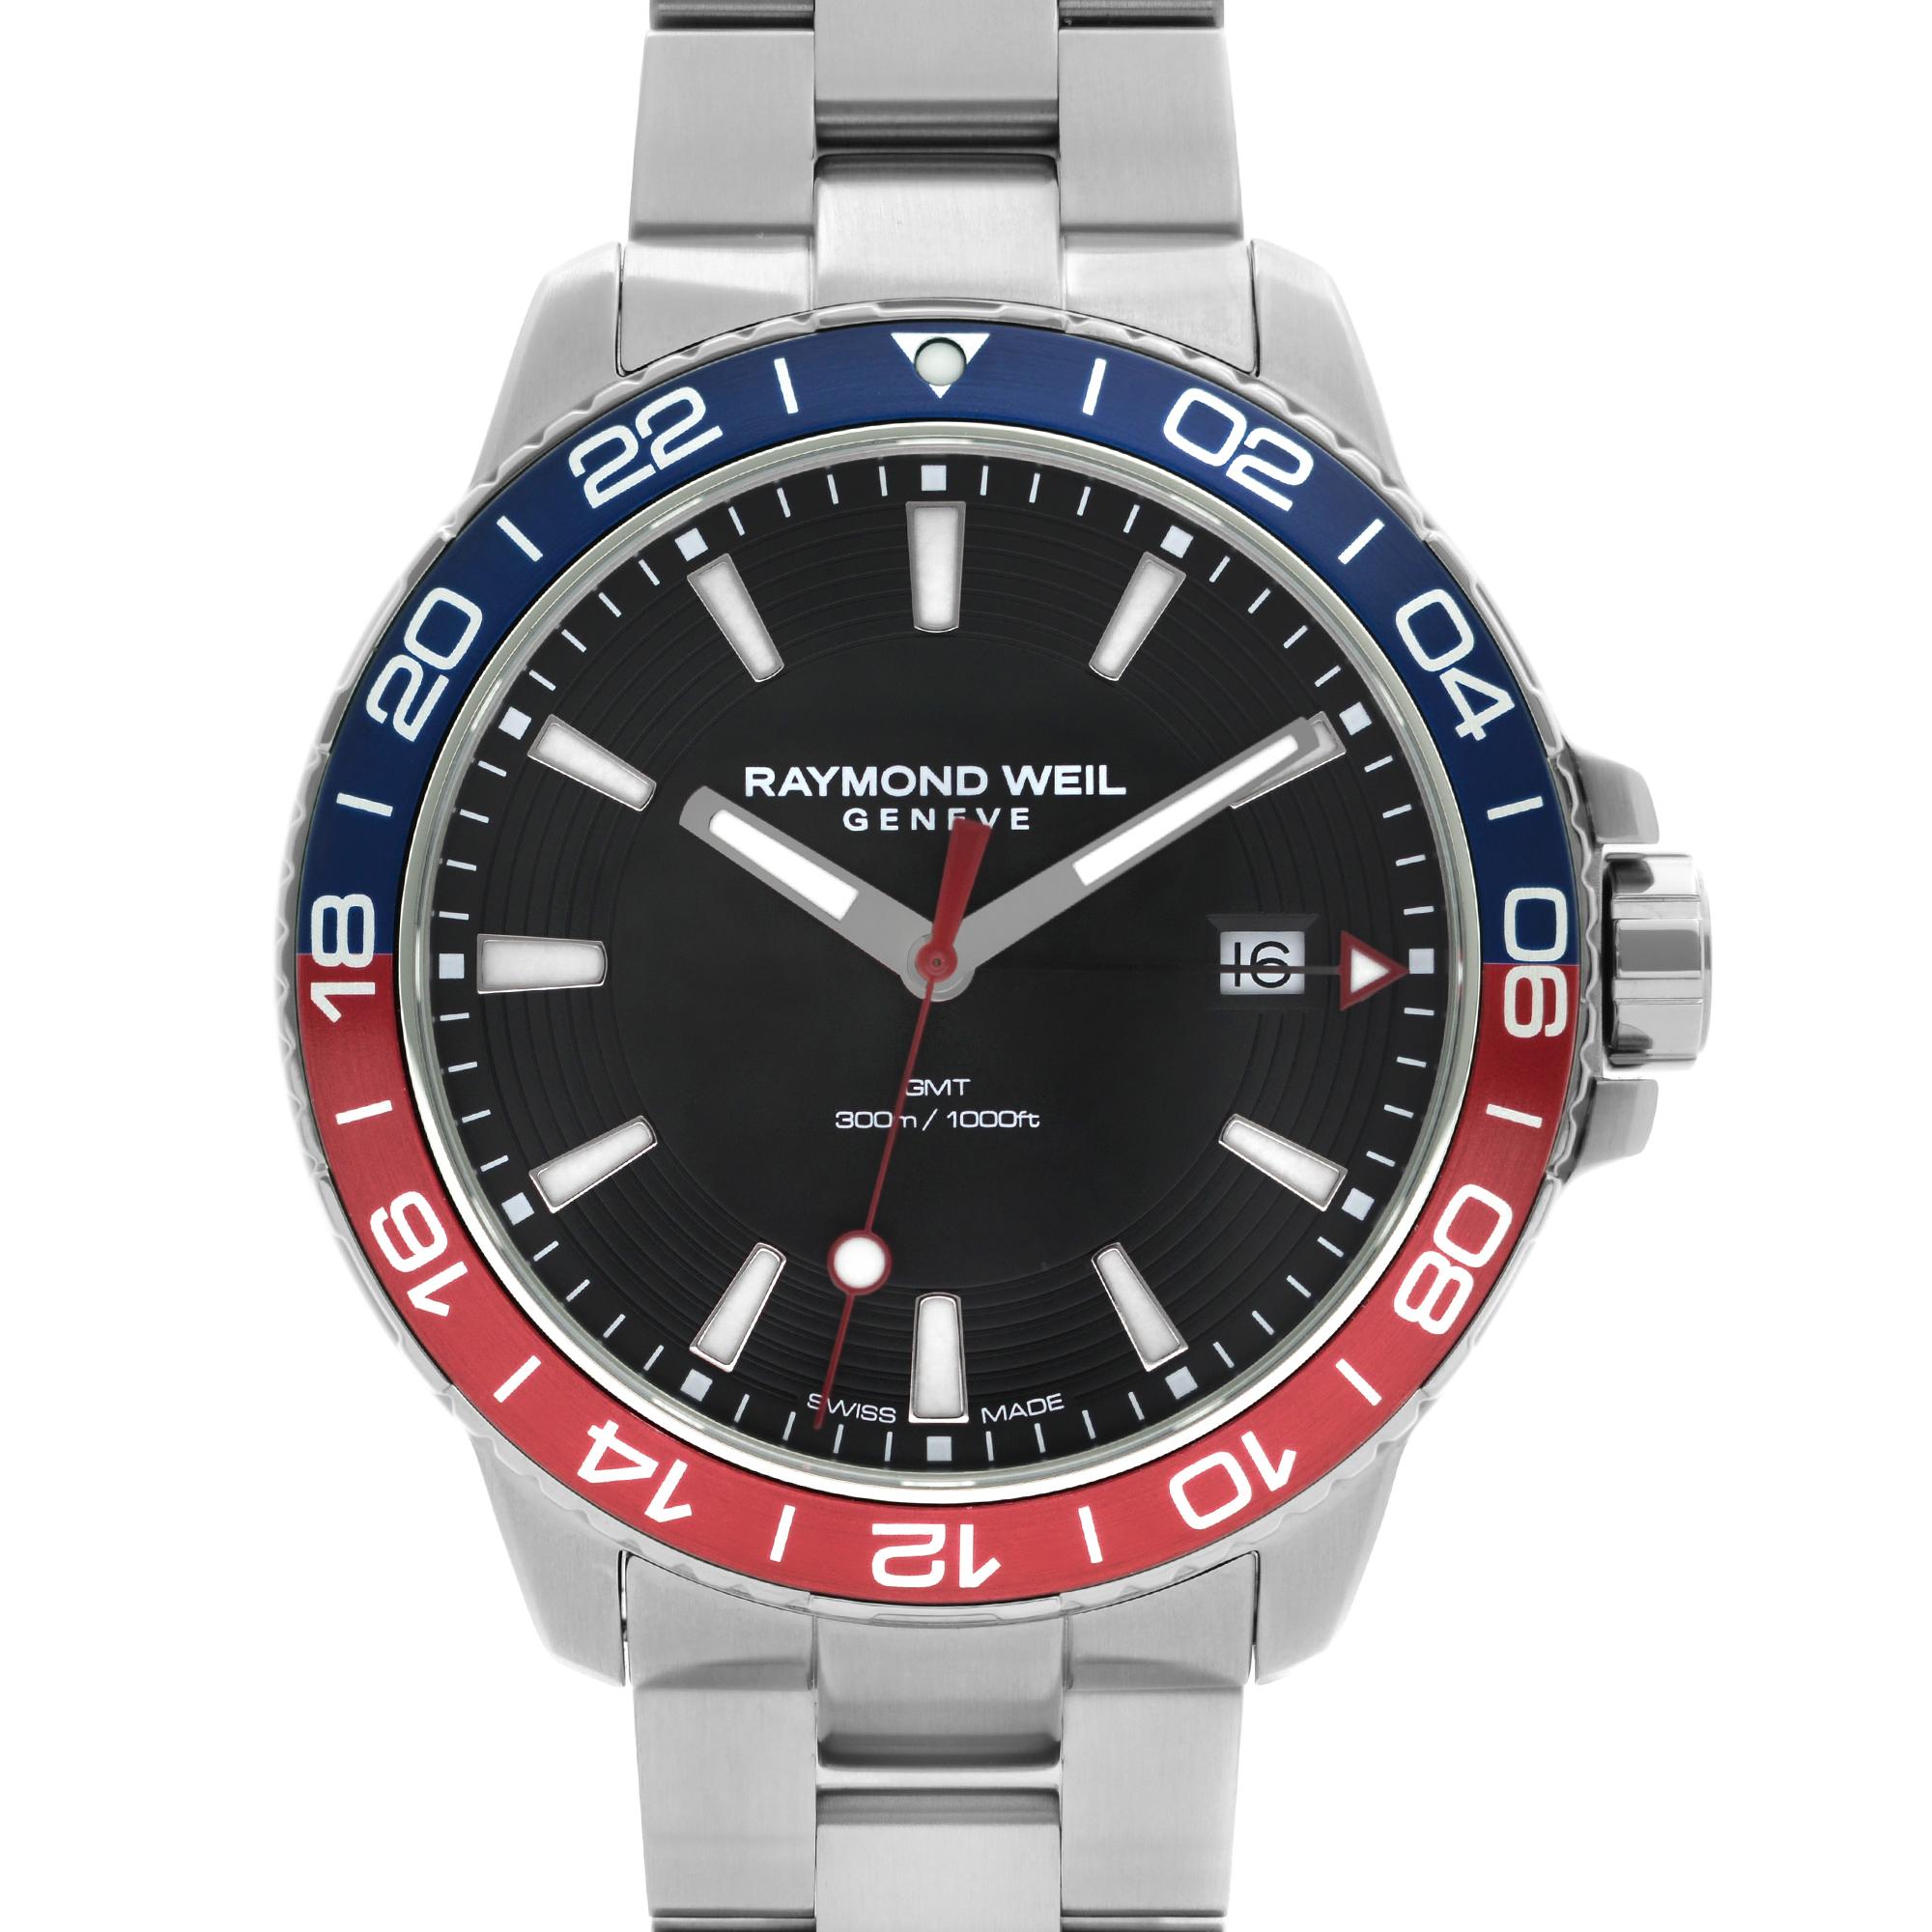 Unworn Raymond Weil Tango Steel Pepsi Black Dial Quartz Men's Watch. This Beautiful Timepiece Features: Stainless Steel Case and Bracelet, Rotating Blue and Red (Pepsi) Stainless Steel and Aluminum Bezel, Black Dial with Luminous Silver-Tone Hands,